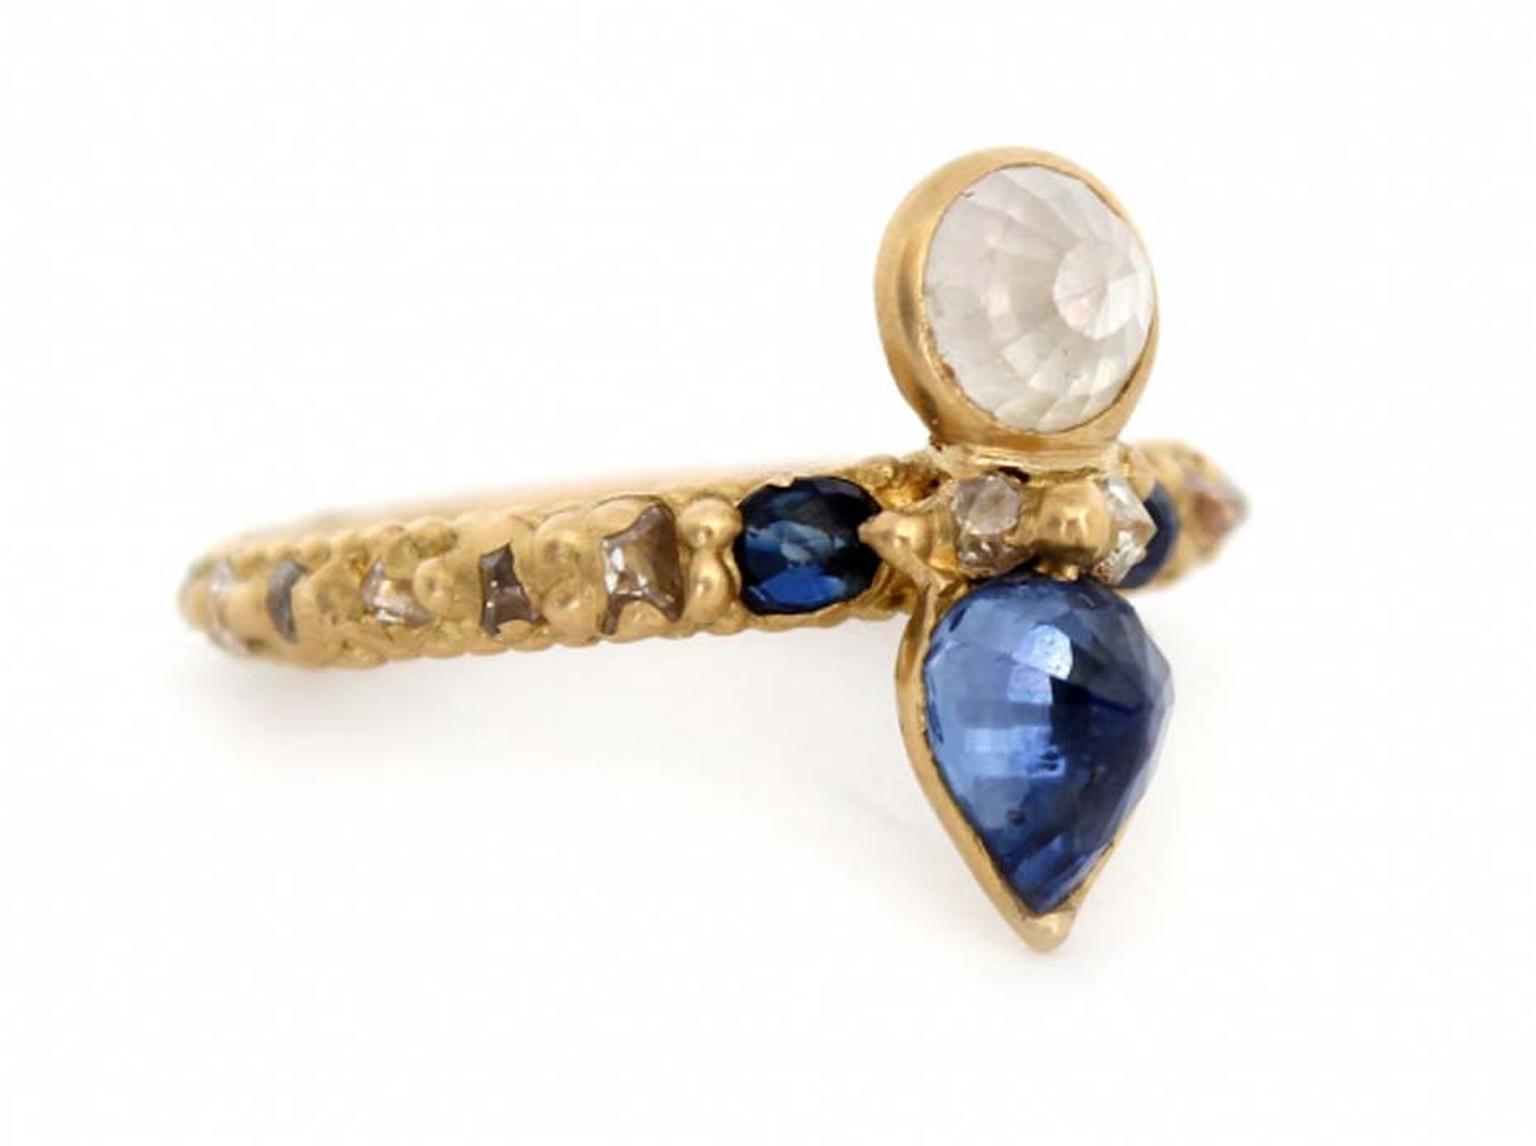 Polly Wales Moon Beetle ring emphasises the metallic blue sheen of a rose-cut sapphire by juxtaposing it with a white diamond on a yellow gold band set with sapphires and smaller diamonds.